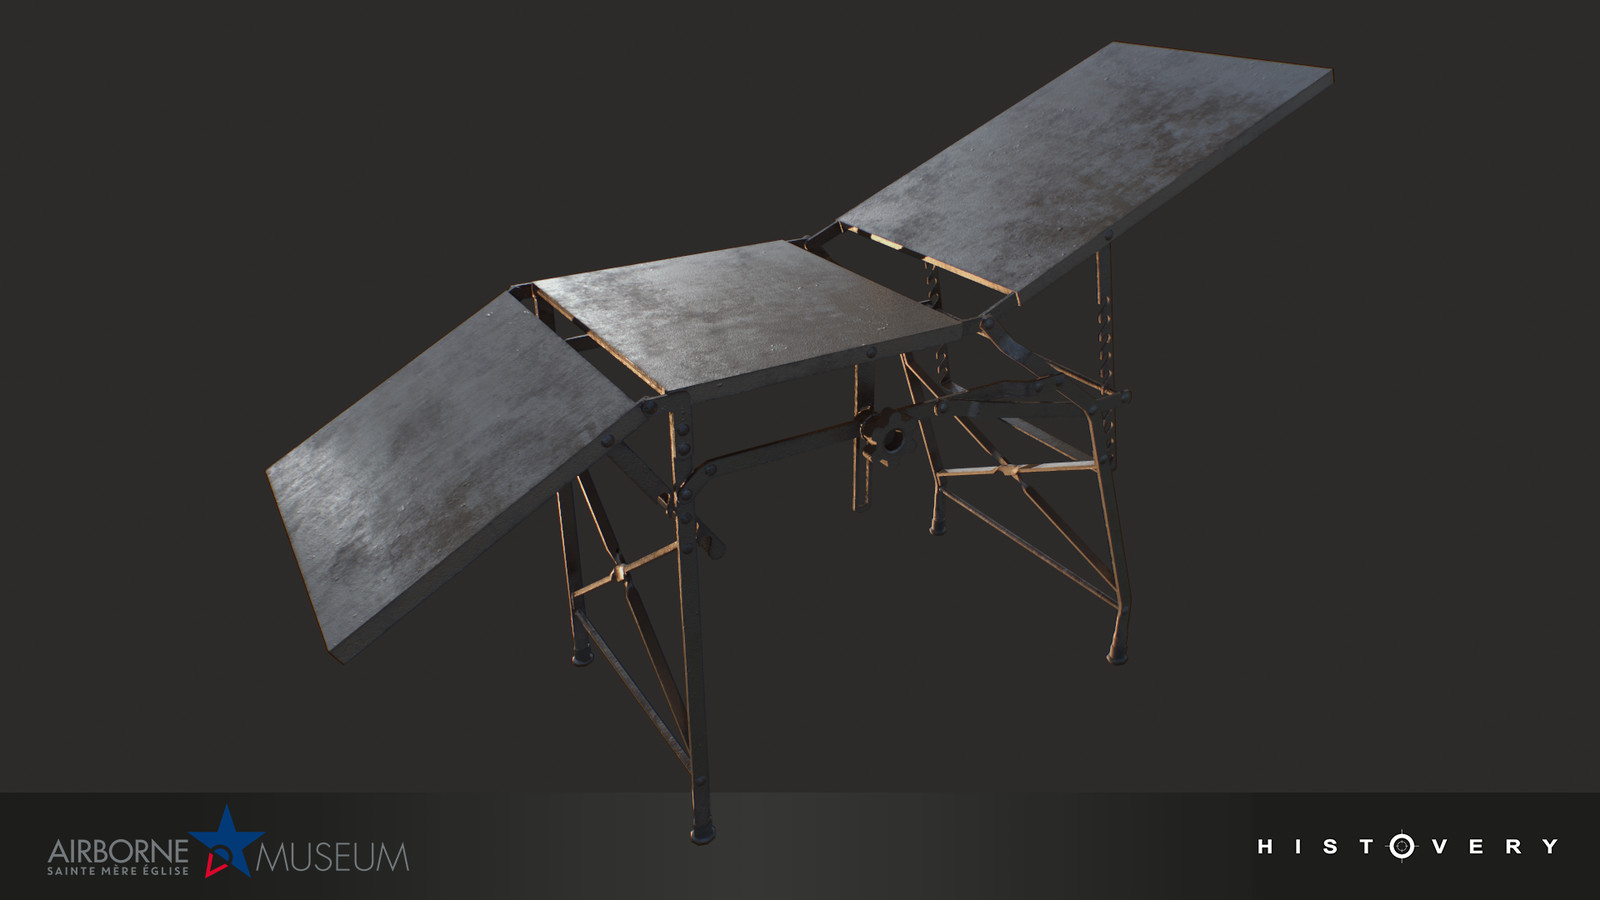 Operating table, which could be adjusted flat or leaning for the patient, or folded up for transport.